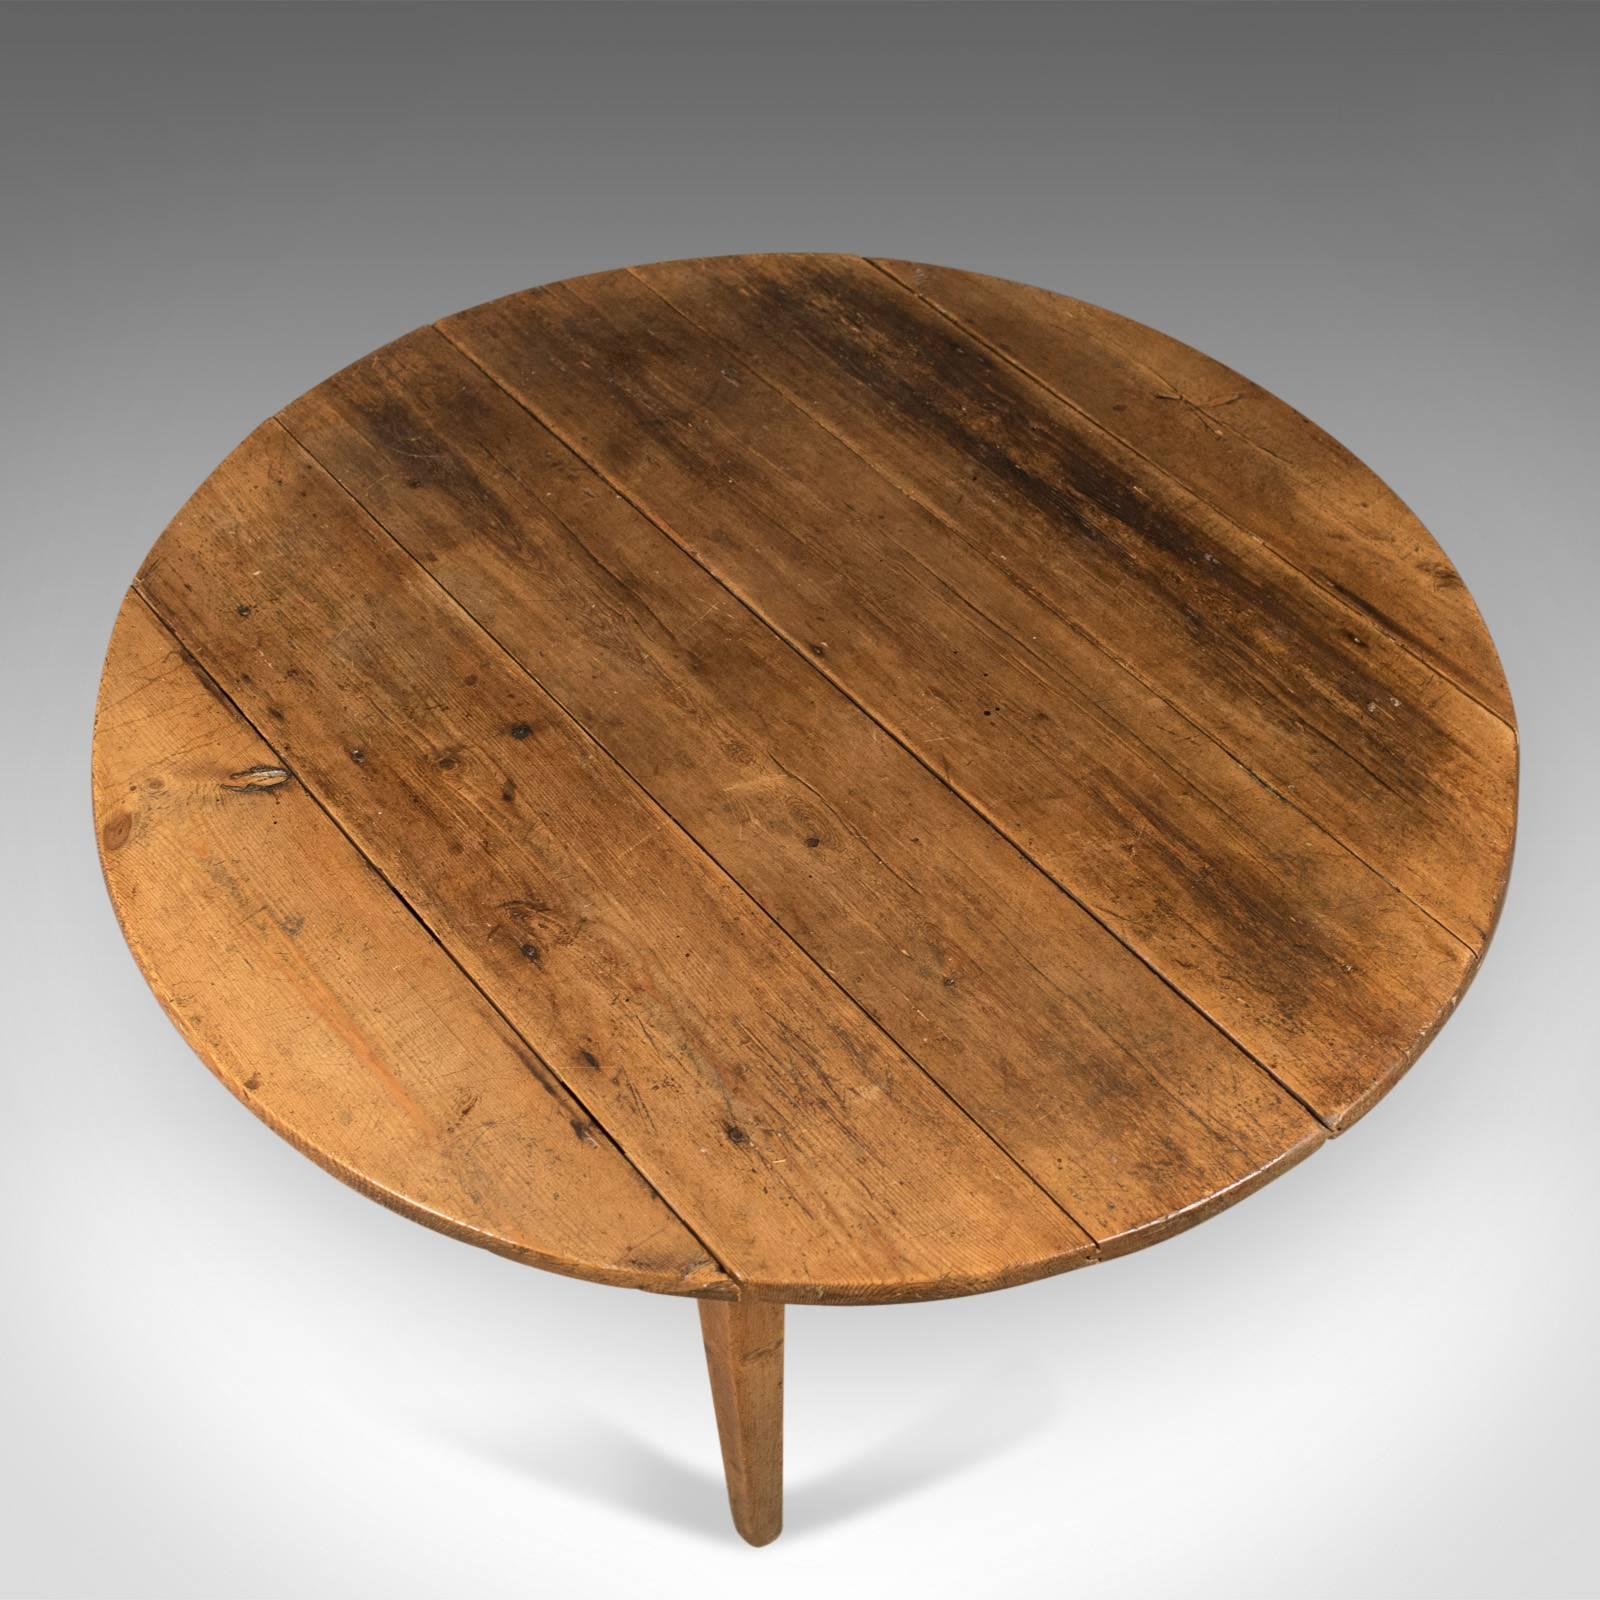 19th Century Four, Broad Plank Top with Pleasing Rounded Edge